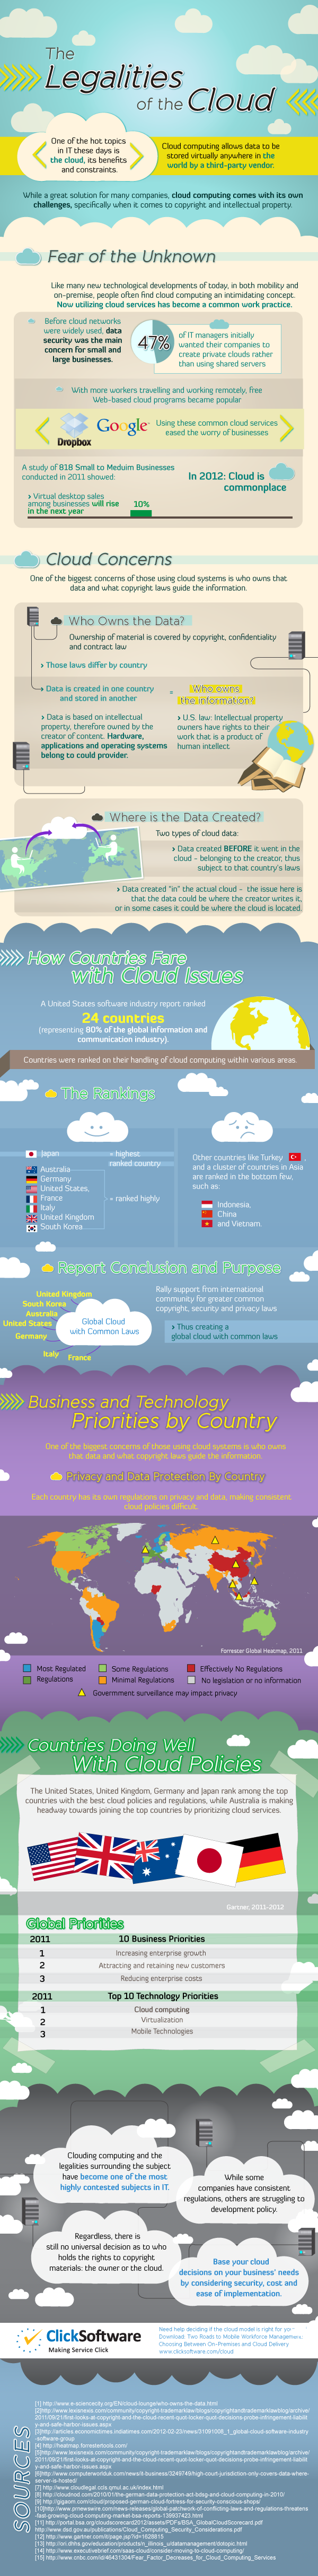 Cloud based workforce management - legality and the cloud infographic